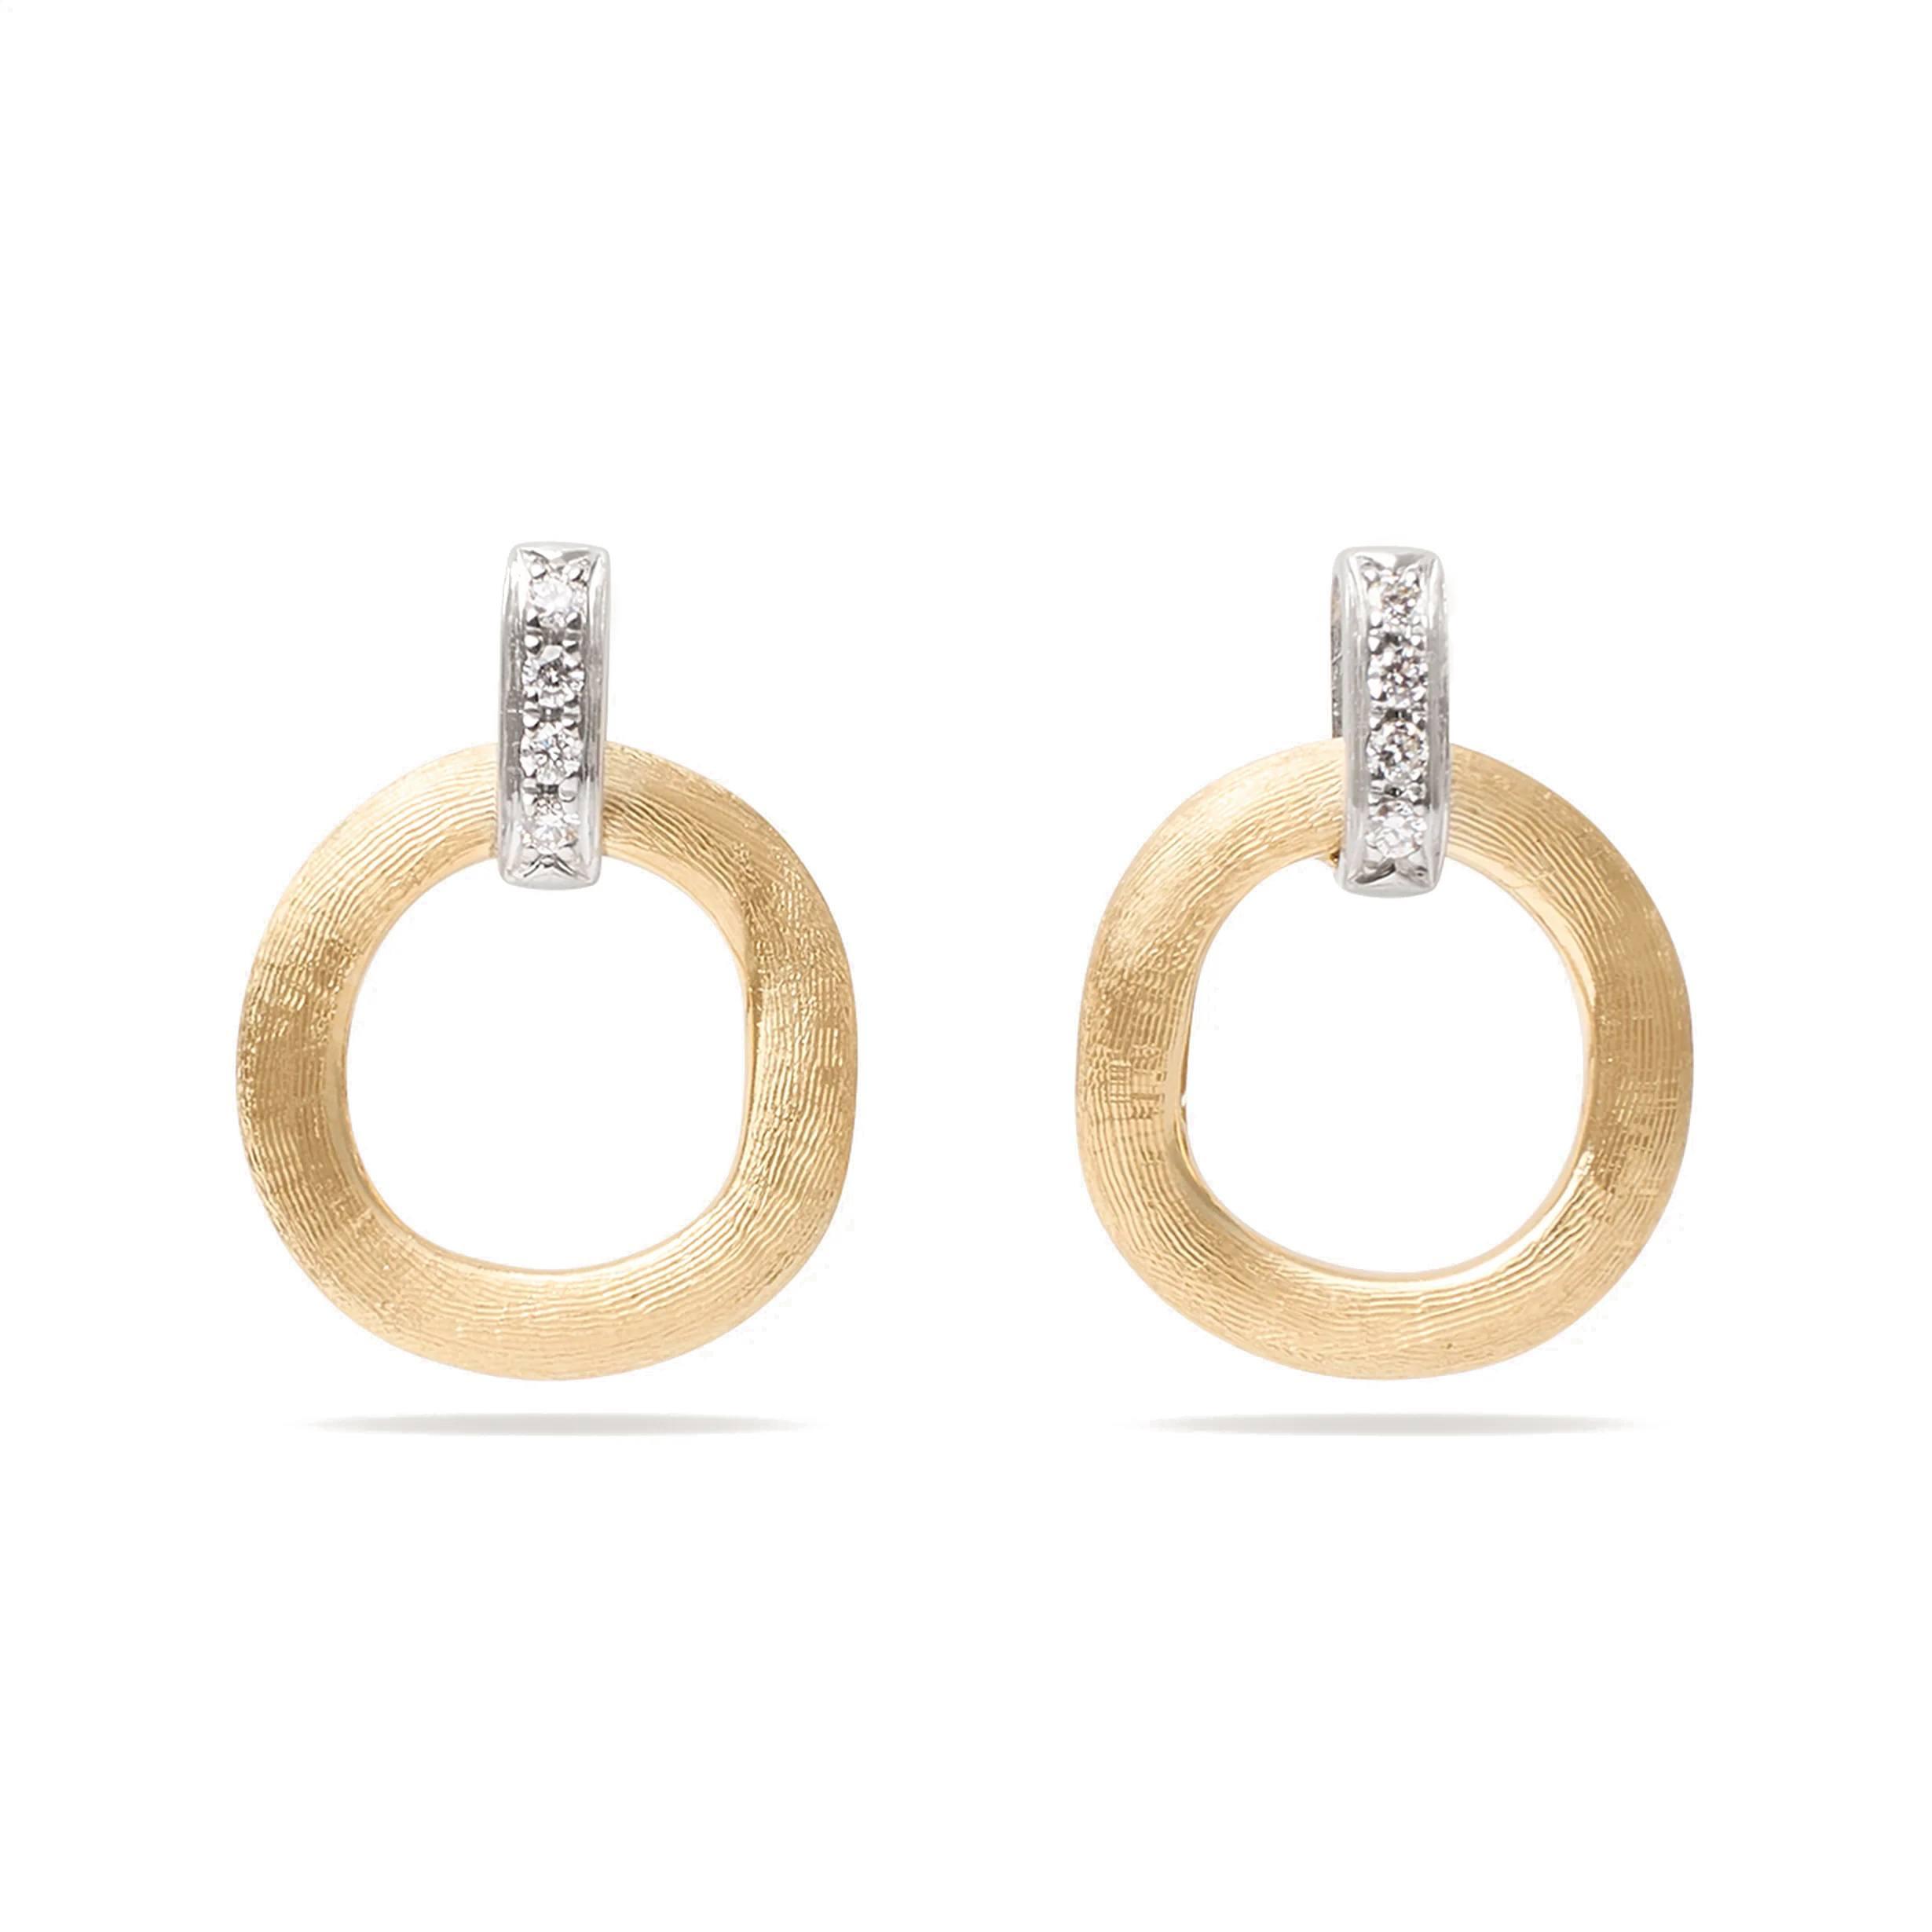 Marco Bicego Jaipur Gold Stud Drop Earrings with Diamonds